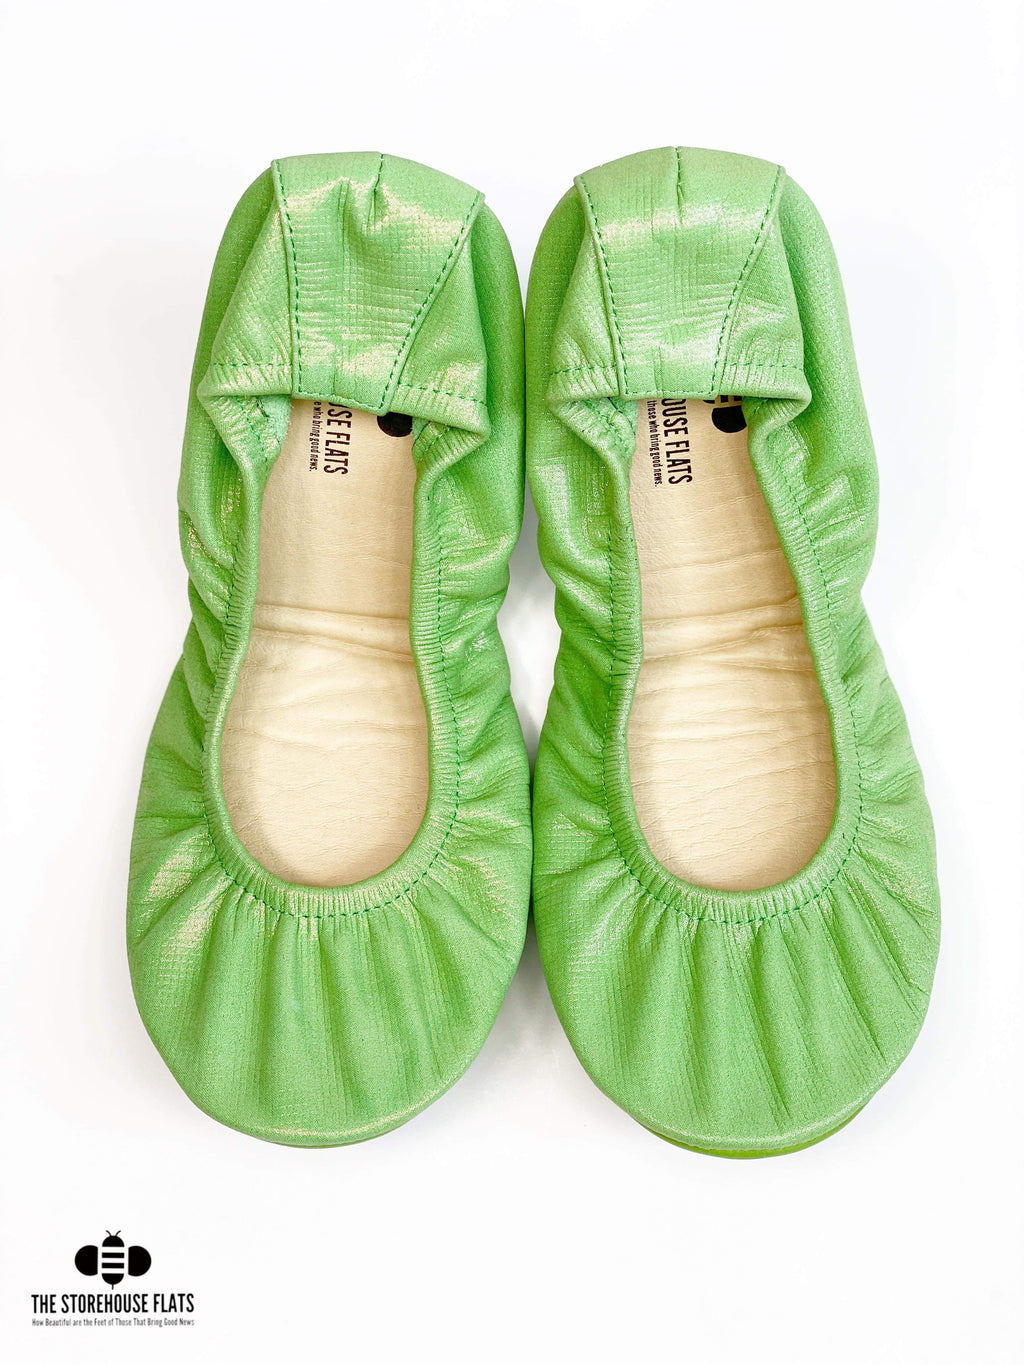 SOUR APPLE TAFFY | JUNE PREORDER - The Storehouse Flats